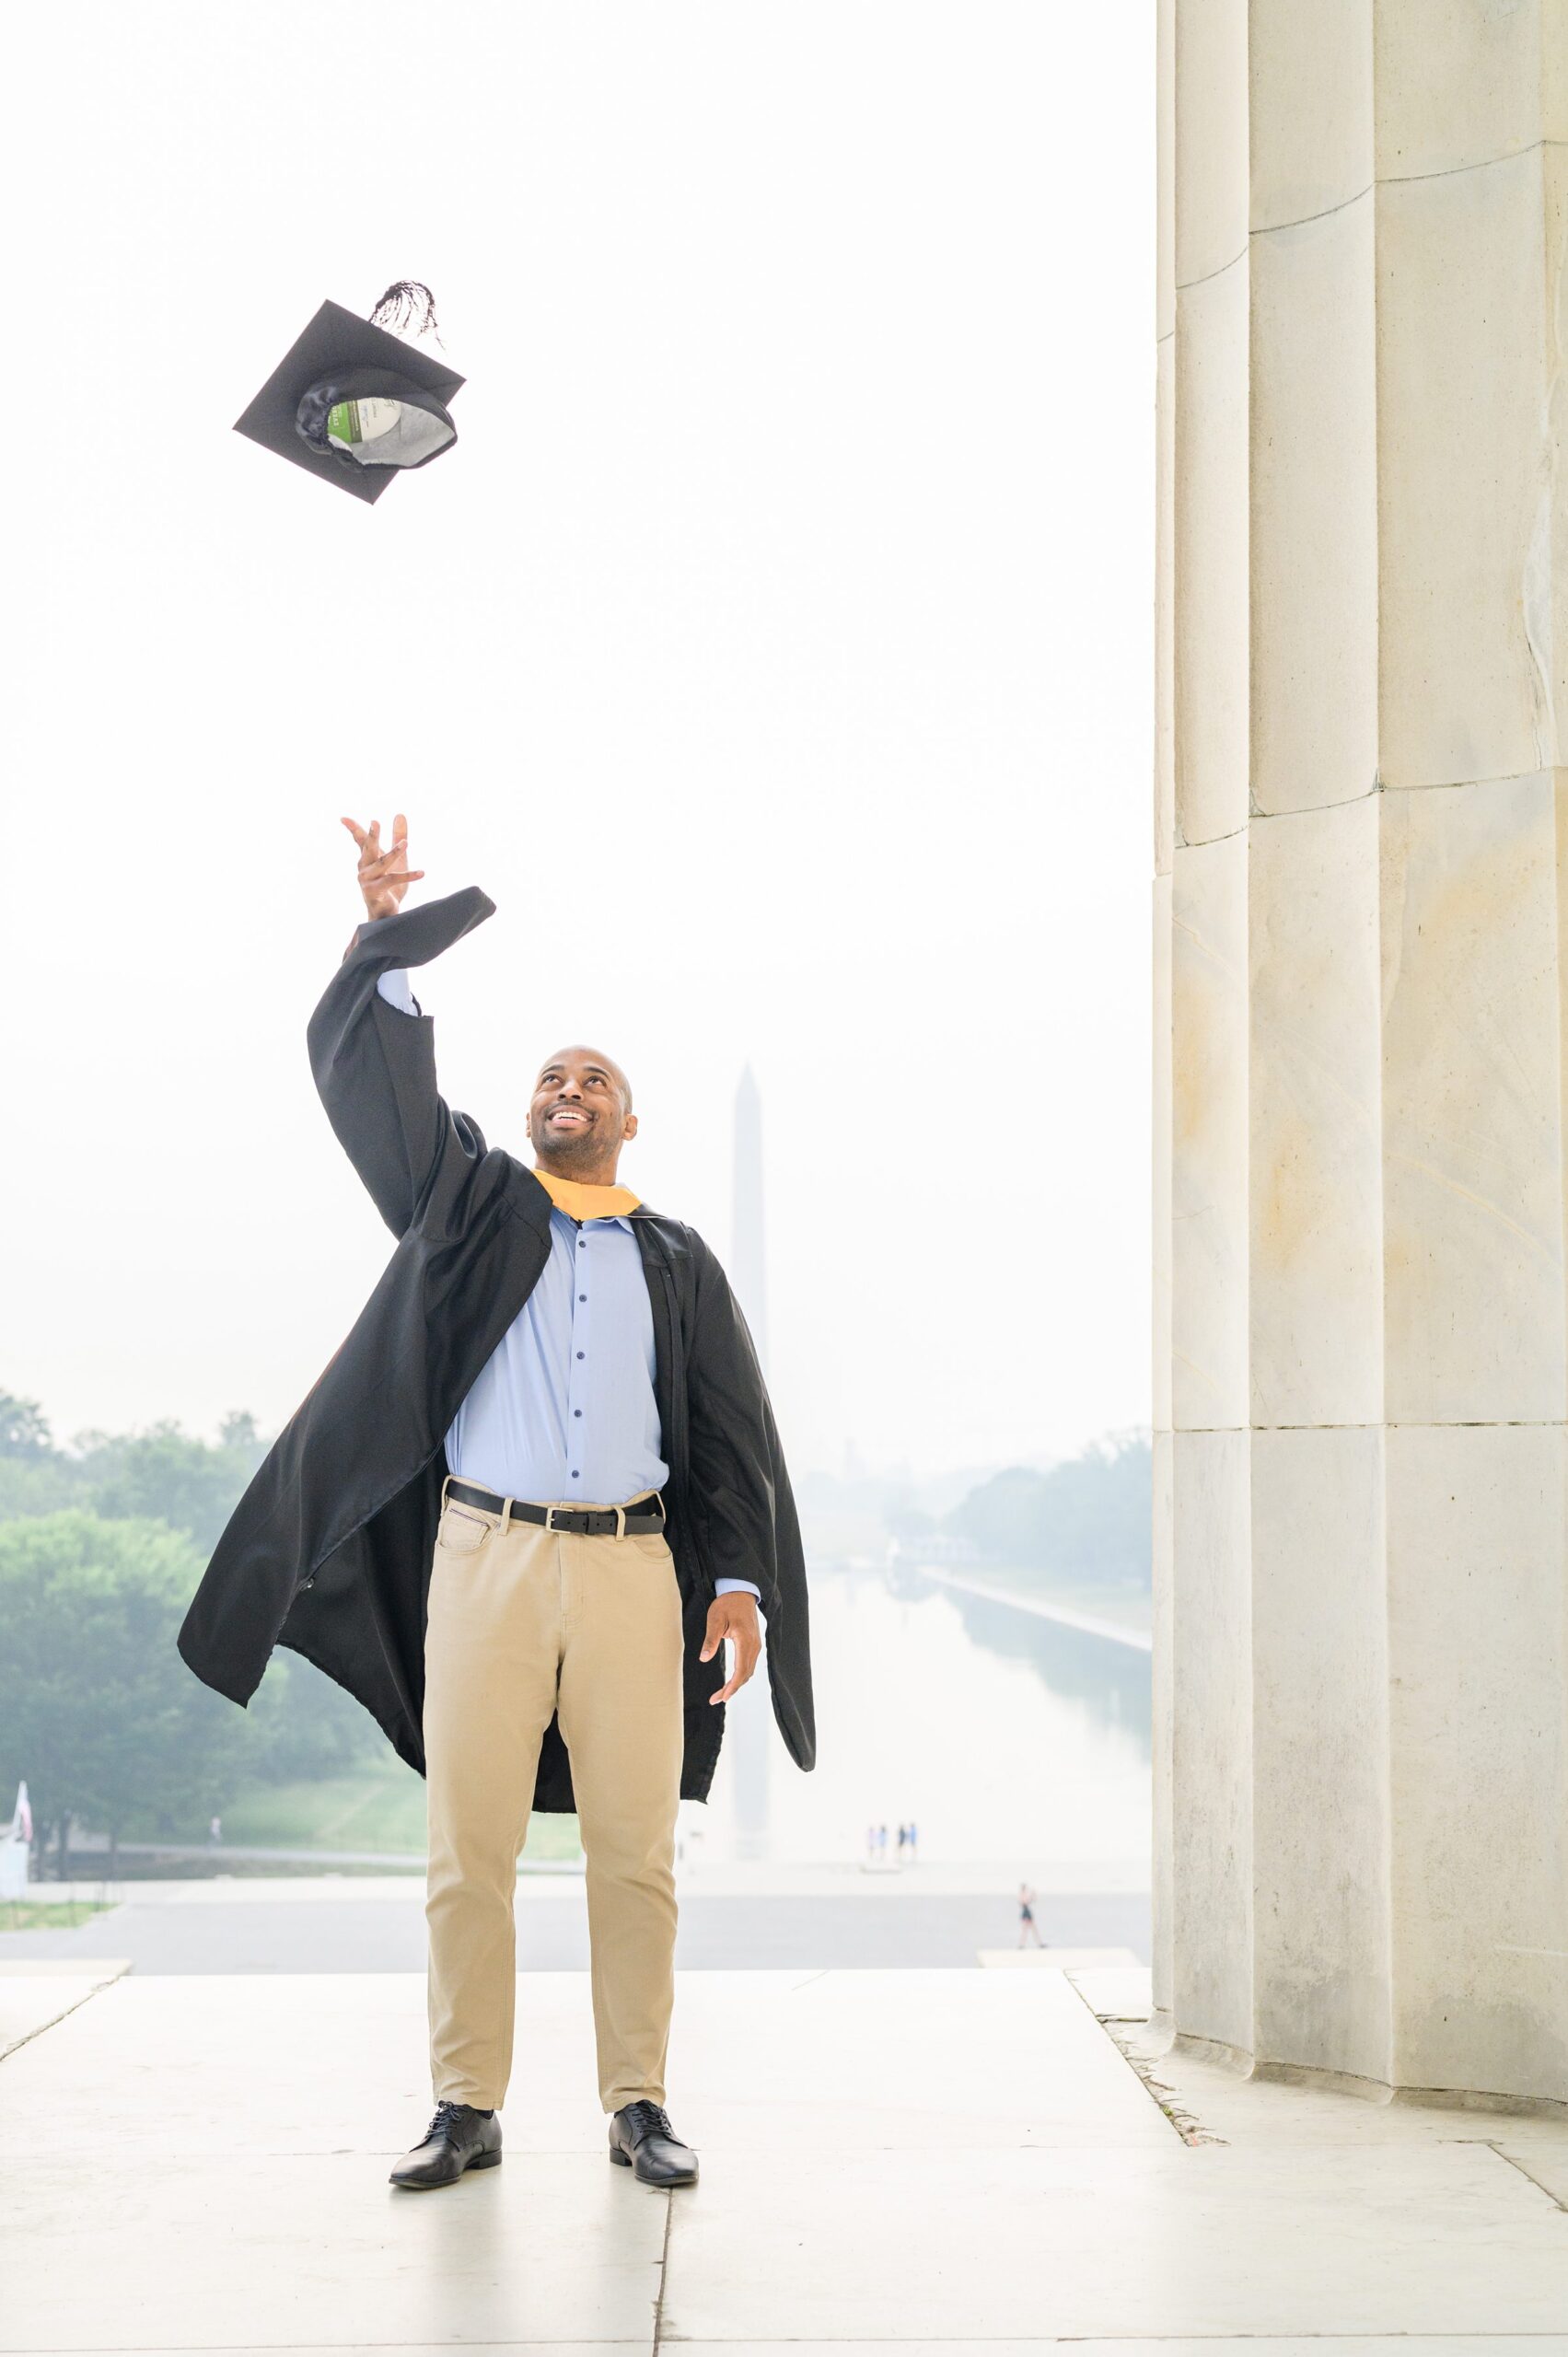 Brand and Christine's Graduation Photos on the National Mall photographed by Baltimore Photographer Cait Kramer